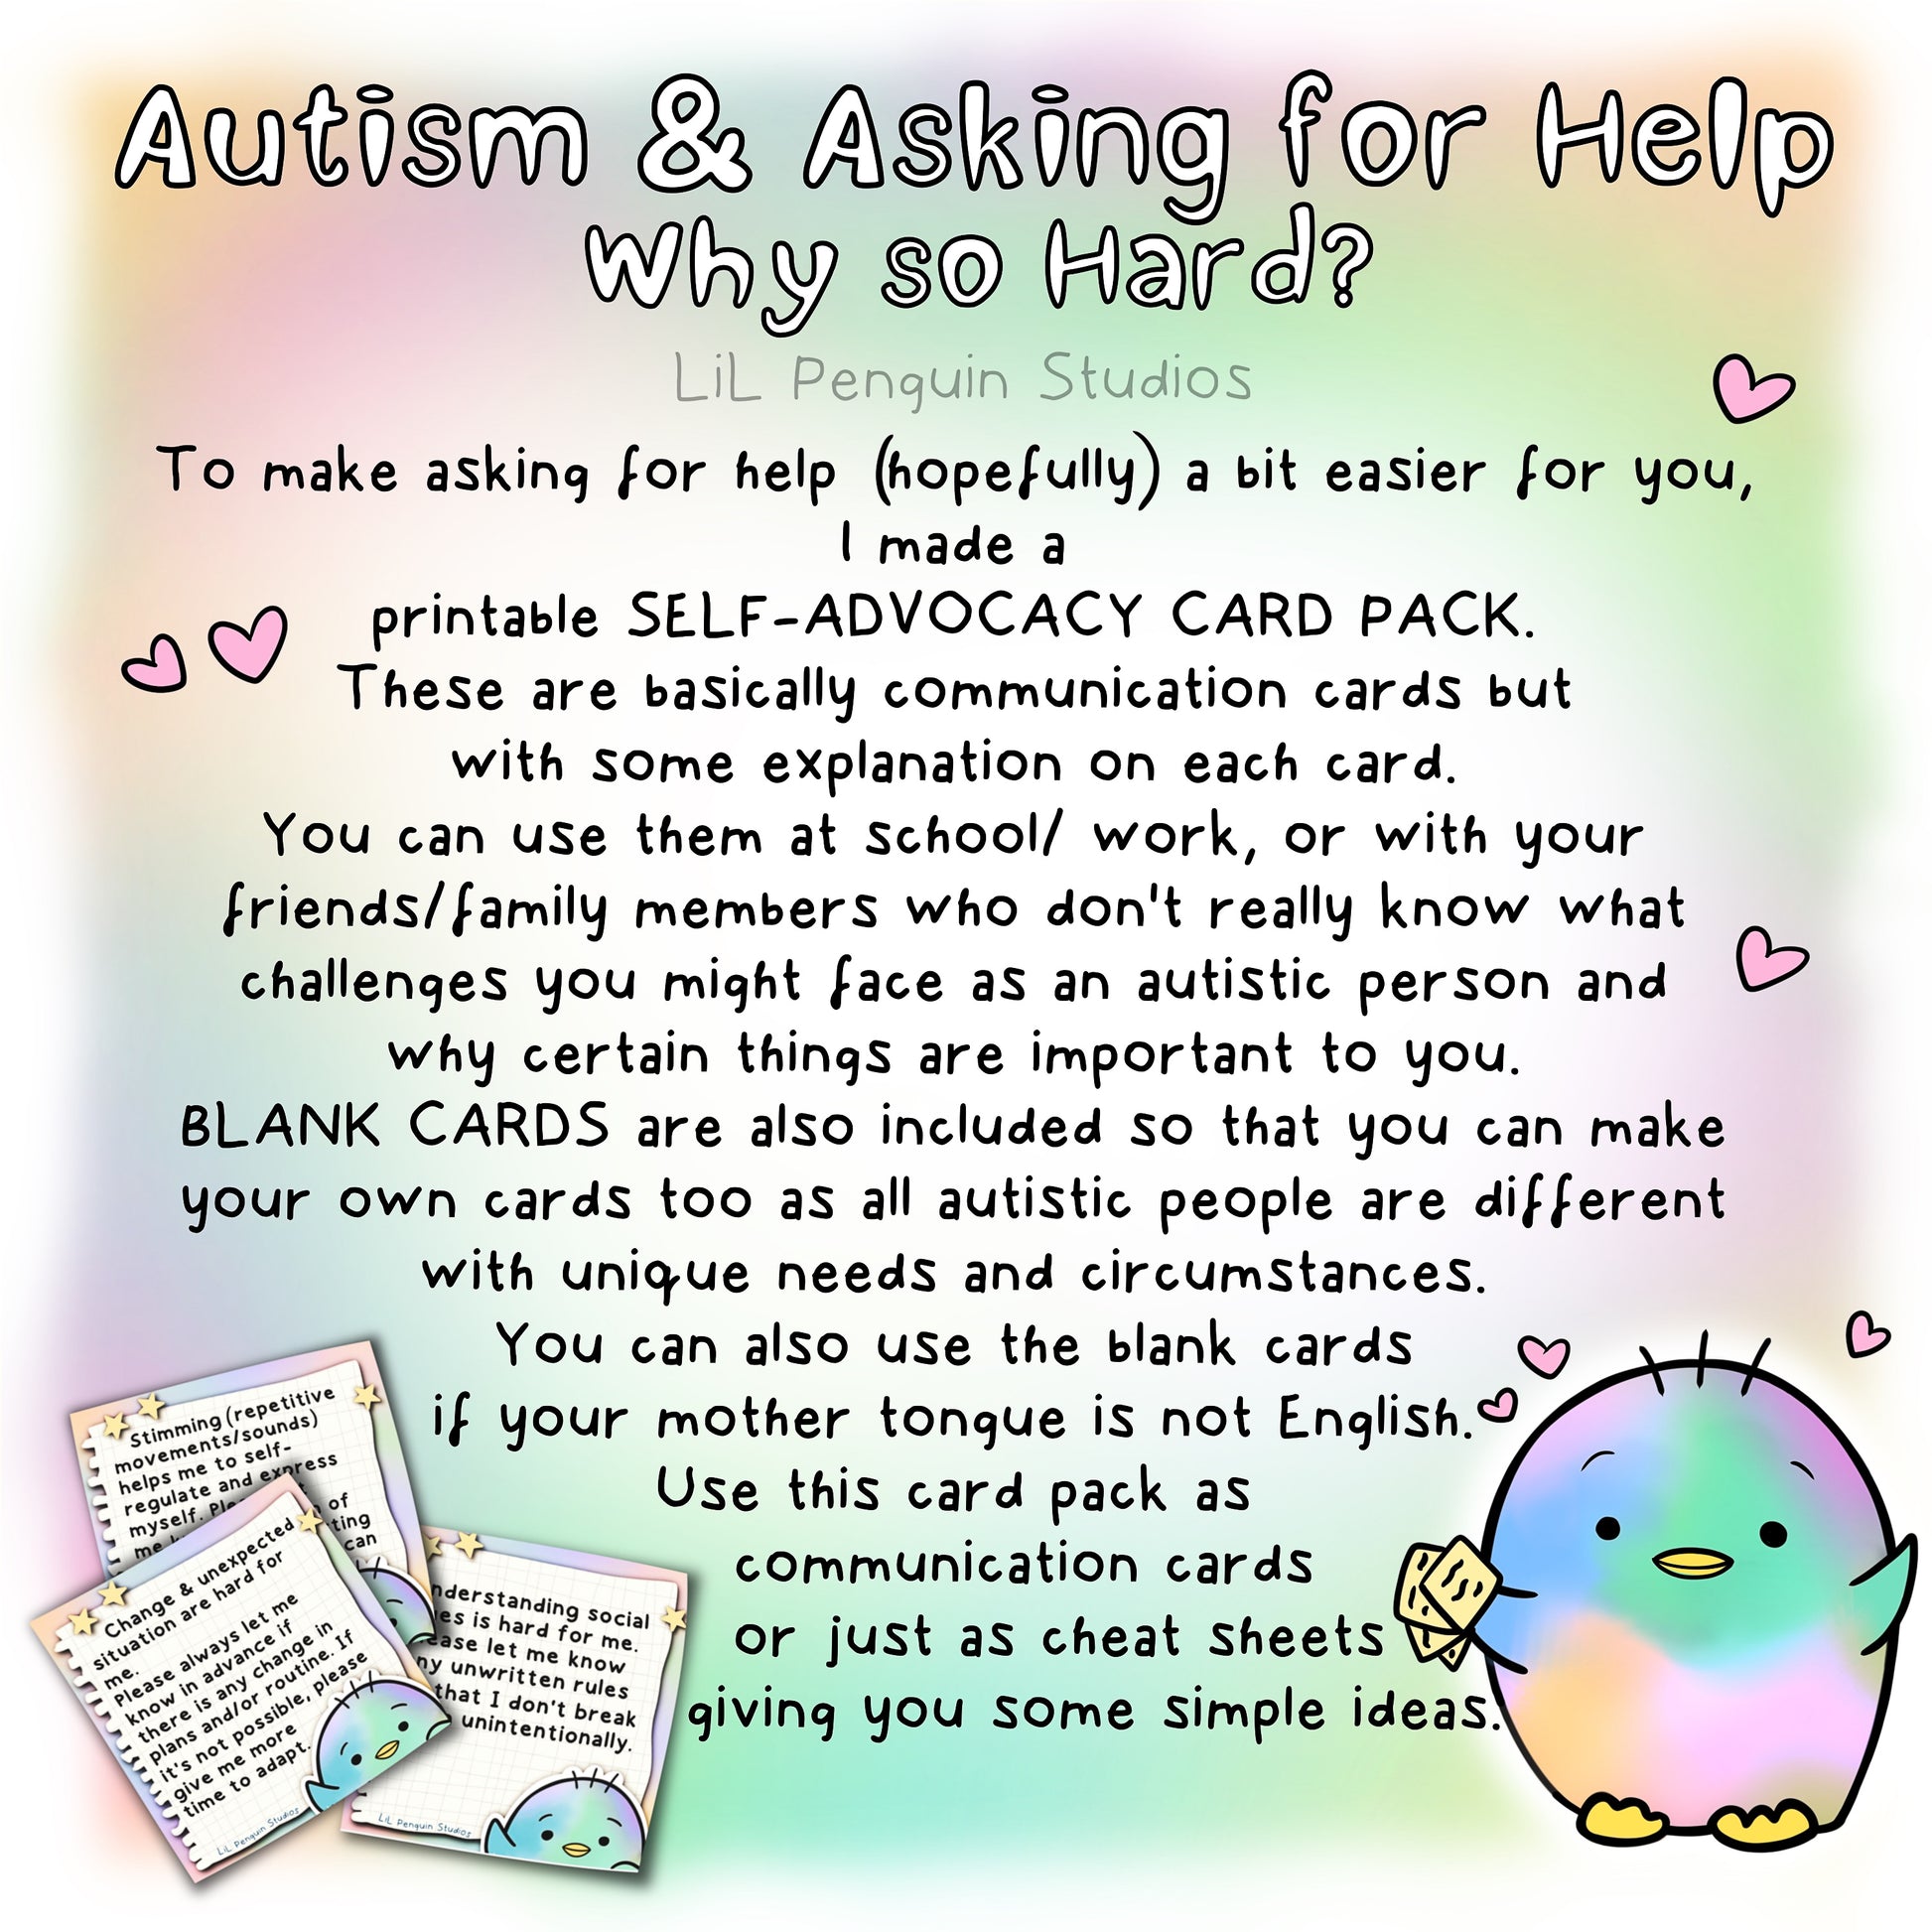 Autism and Asking for Help - Why so Hard? (Autism Zine/ Cards/ Prints)